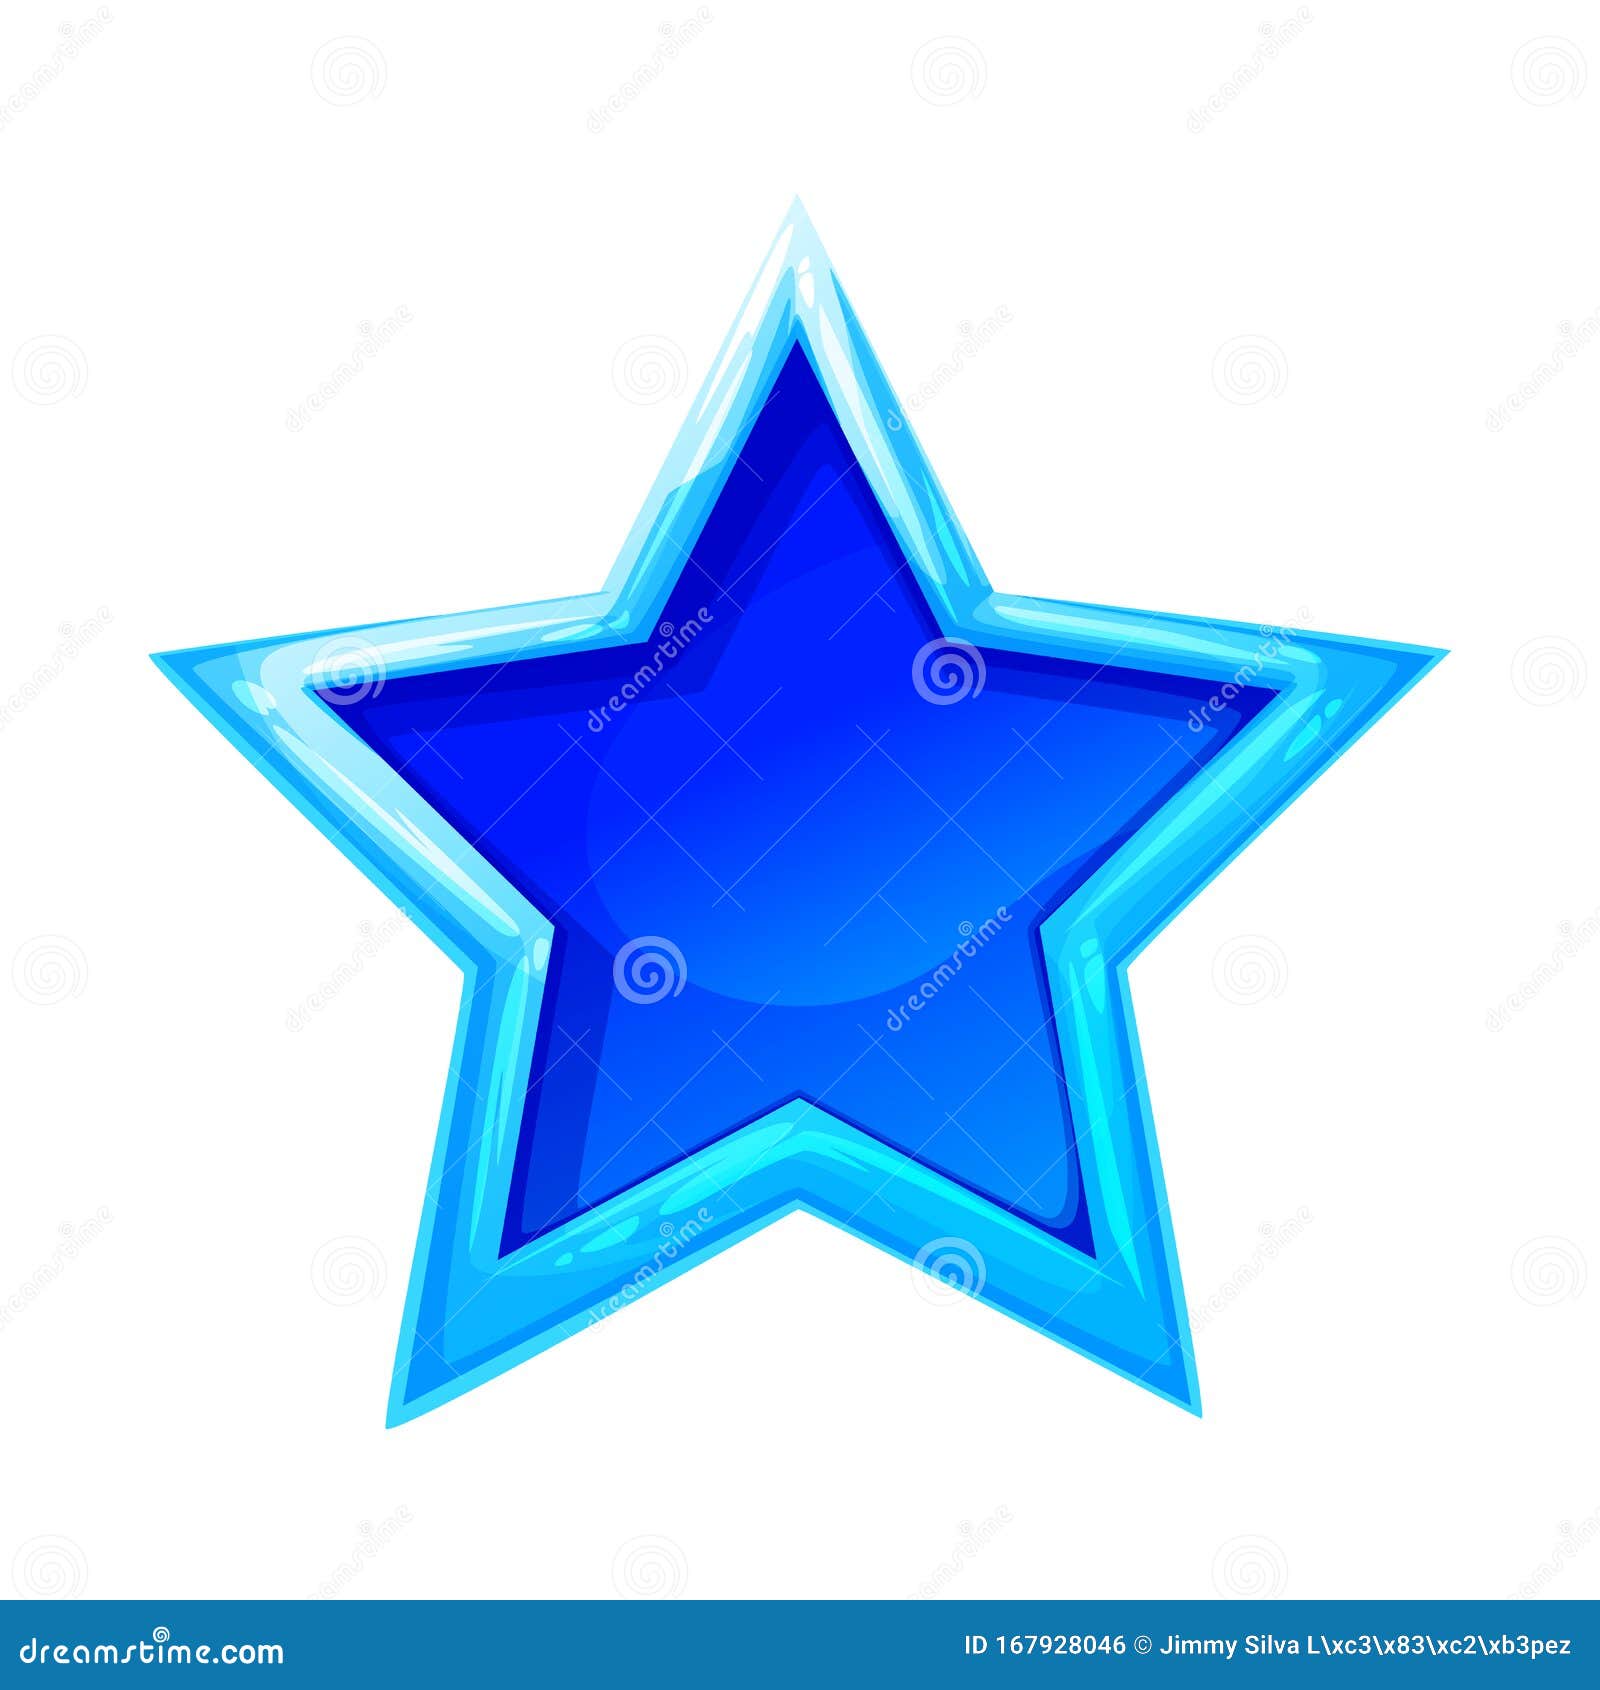 a five-pointed light blue star